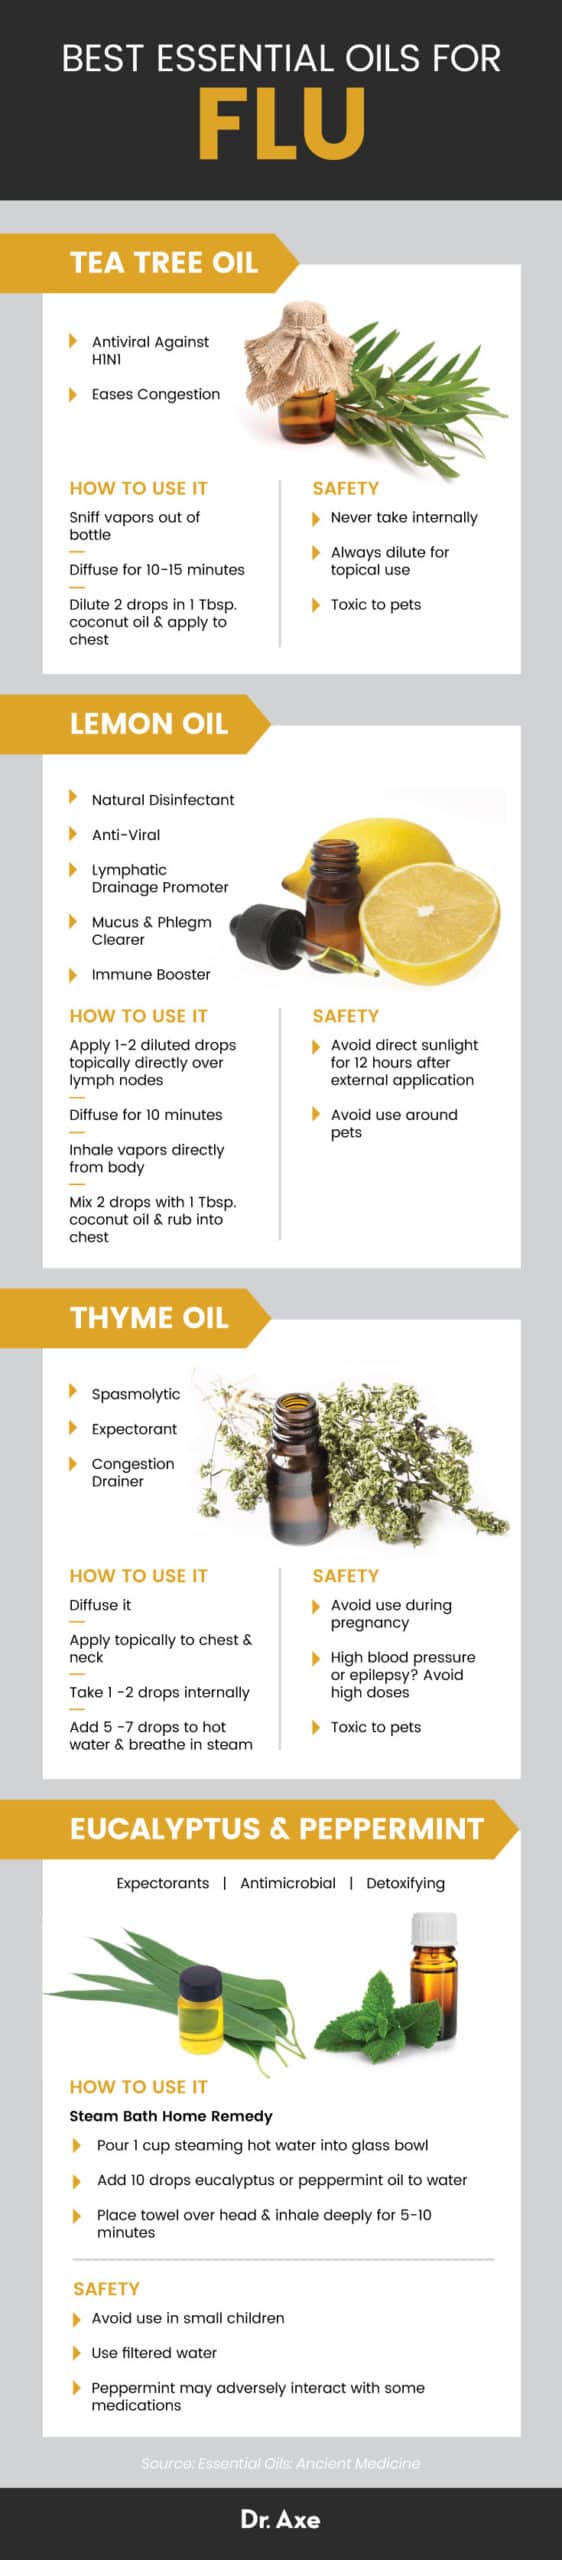 Essential oils for colds and flu - Dr. Axe